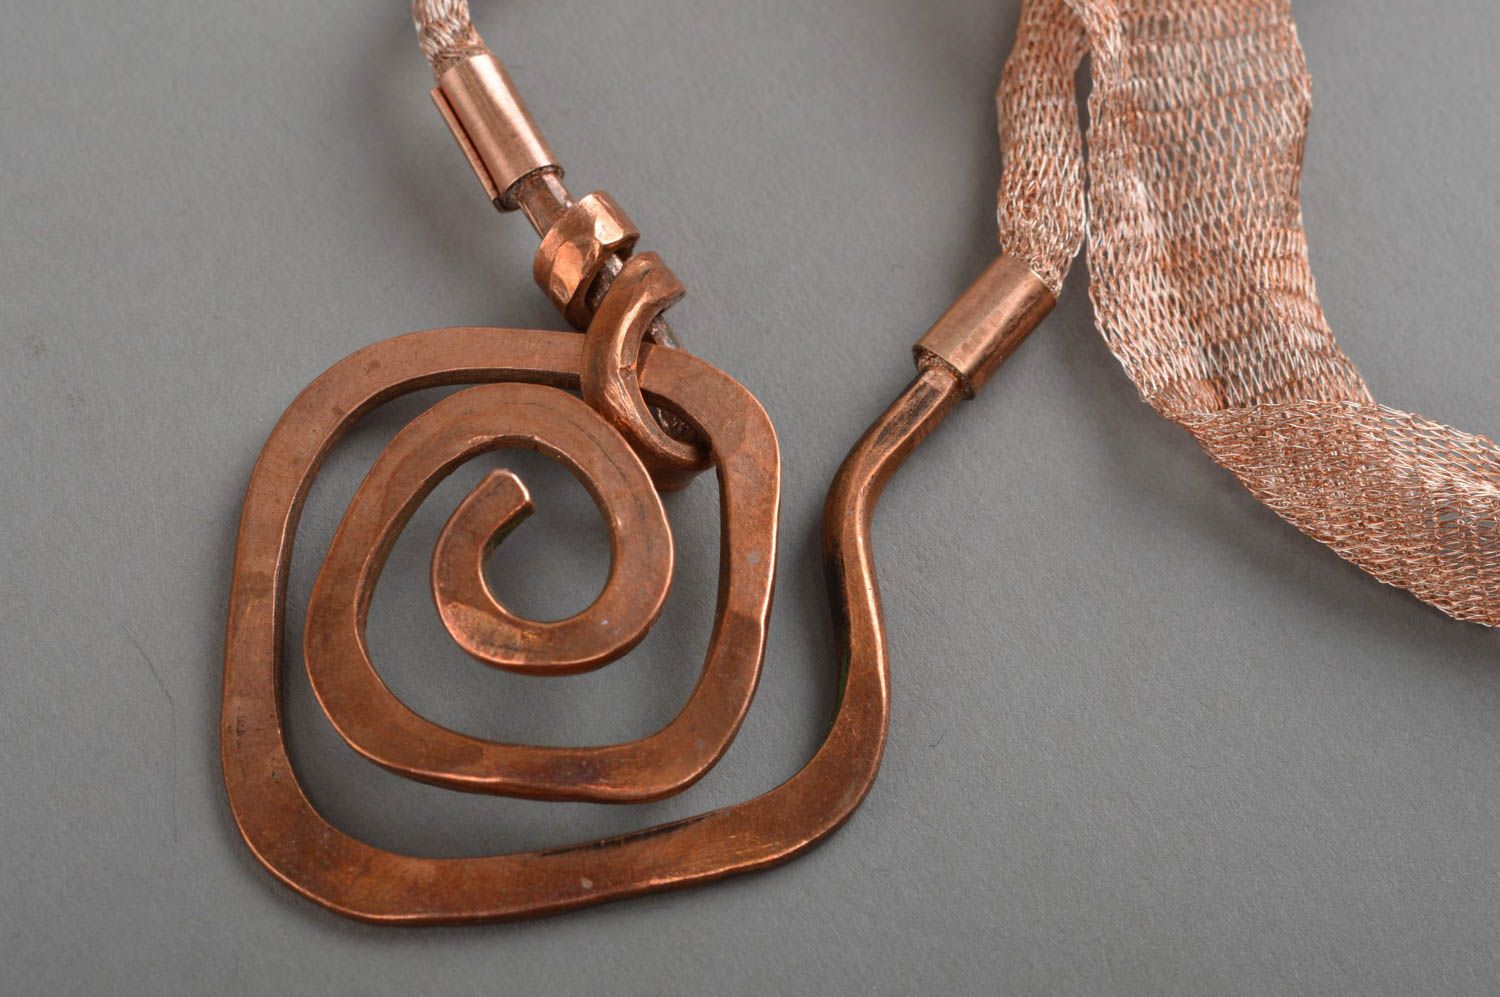 Handmade unusual accessory designer forged pendant on lace made of copper photo 3